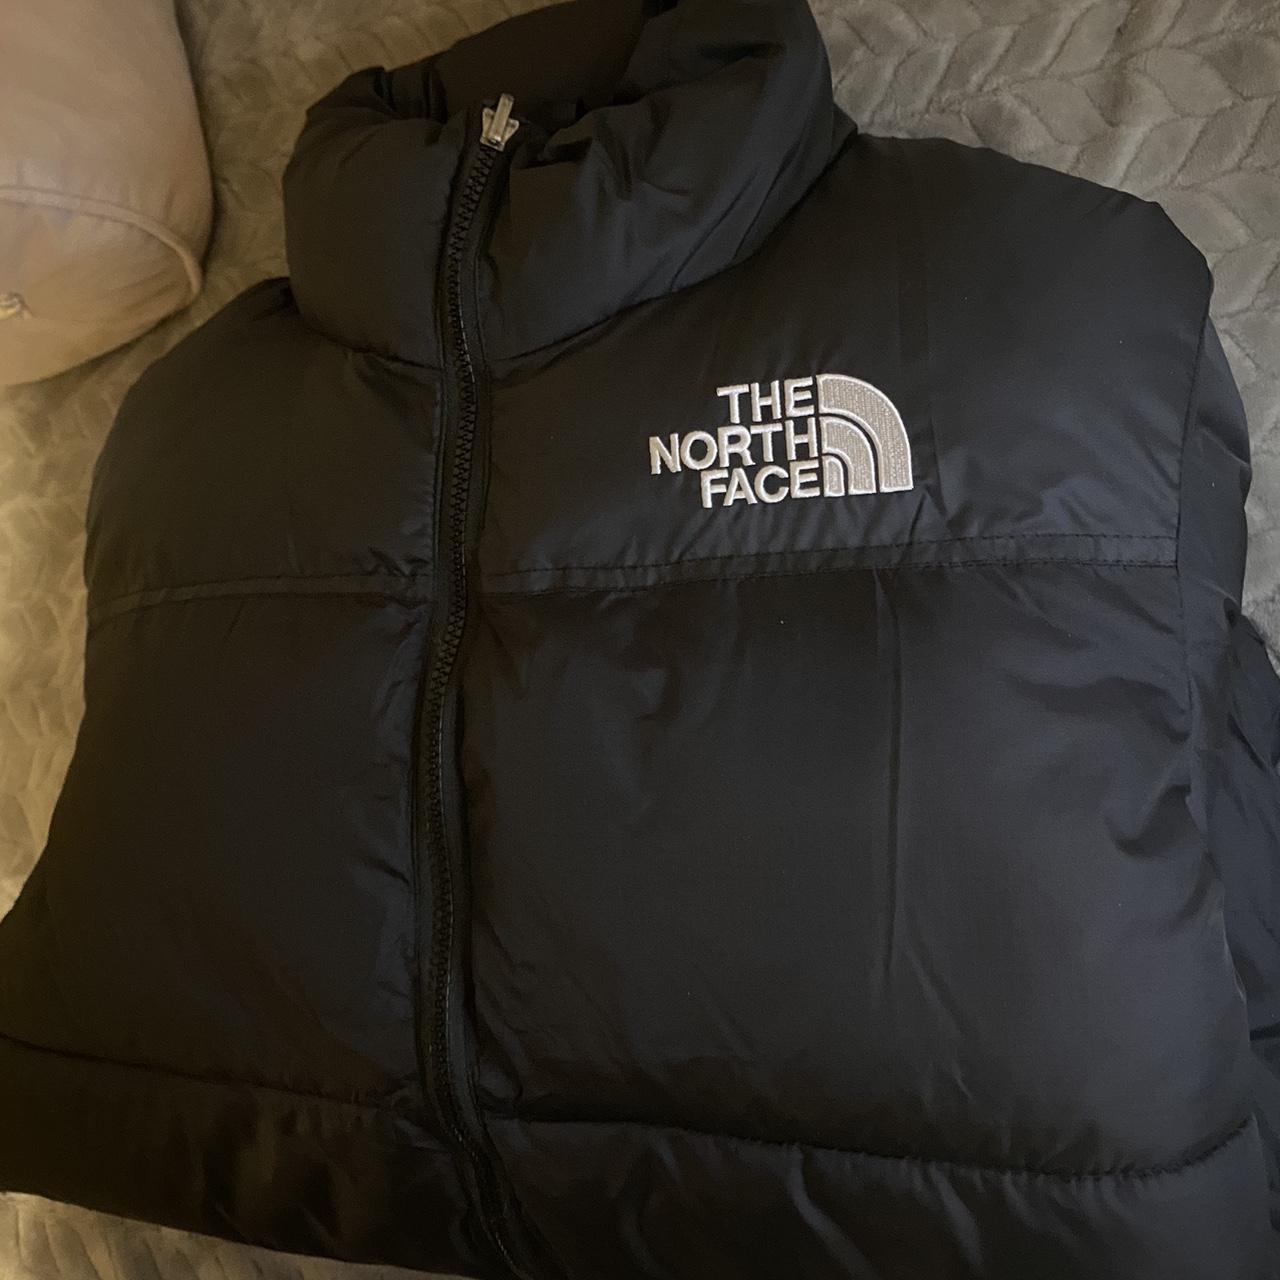 The North Face Coat Never worn brand new - Depop